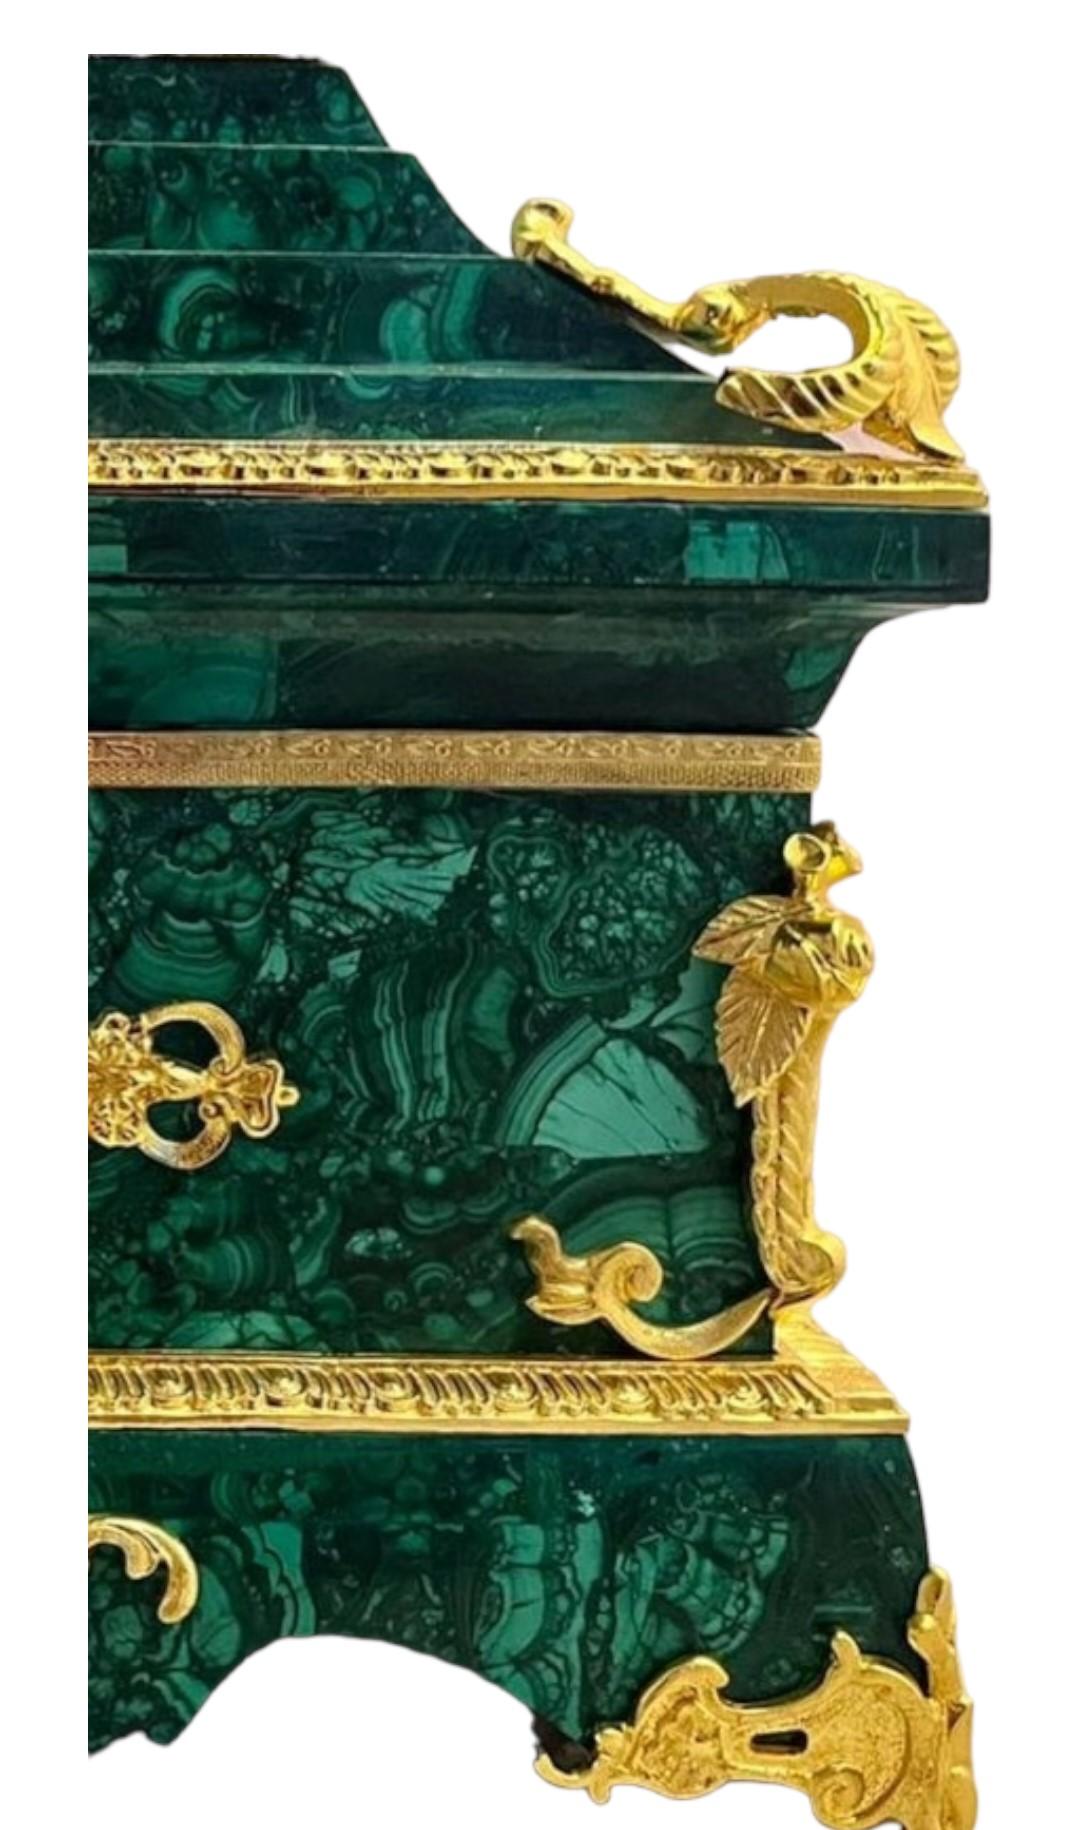 A Very Fine Empire Style ormolu Mounted Box
Lovely Quality and very fine Ormolu mounted
This Box Stands at 40cm in Height and is truly Magnificent